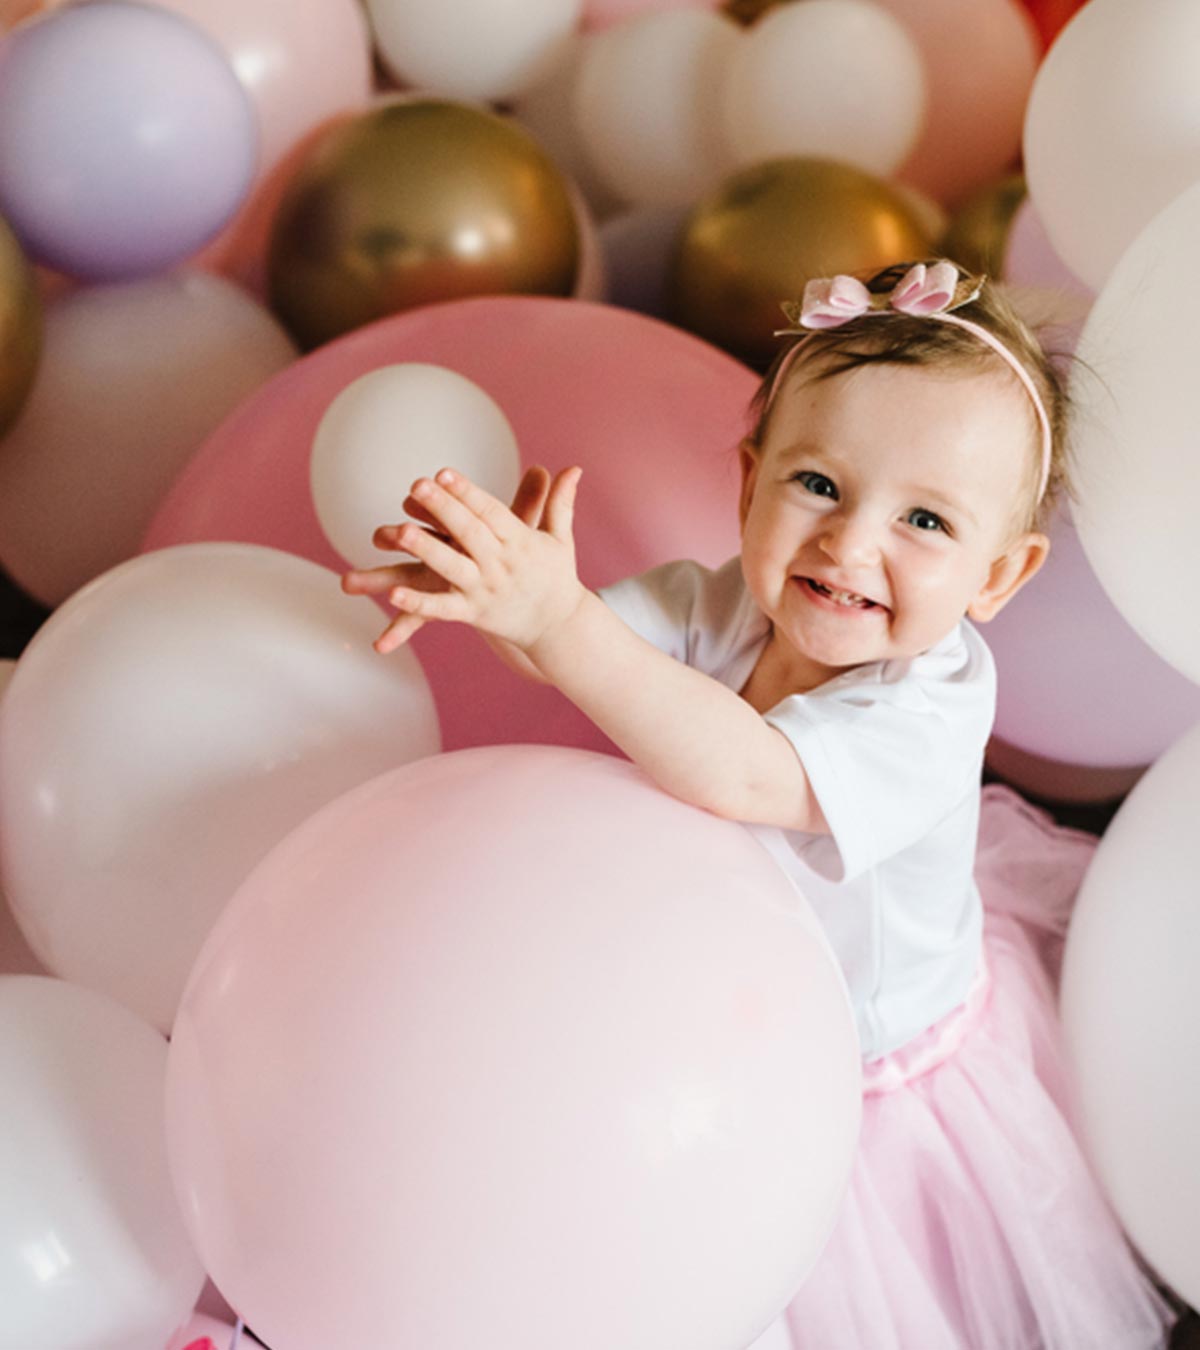 Why Parents Are Tying Balloons Around Their Babies’ Arms and Legs